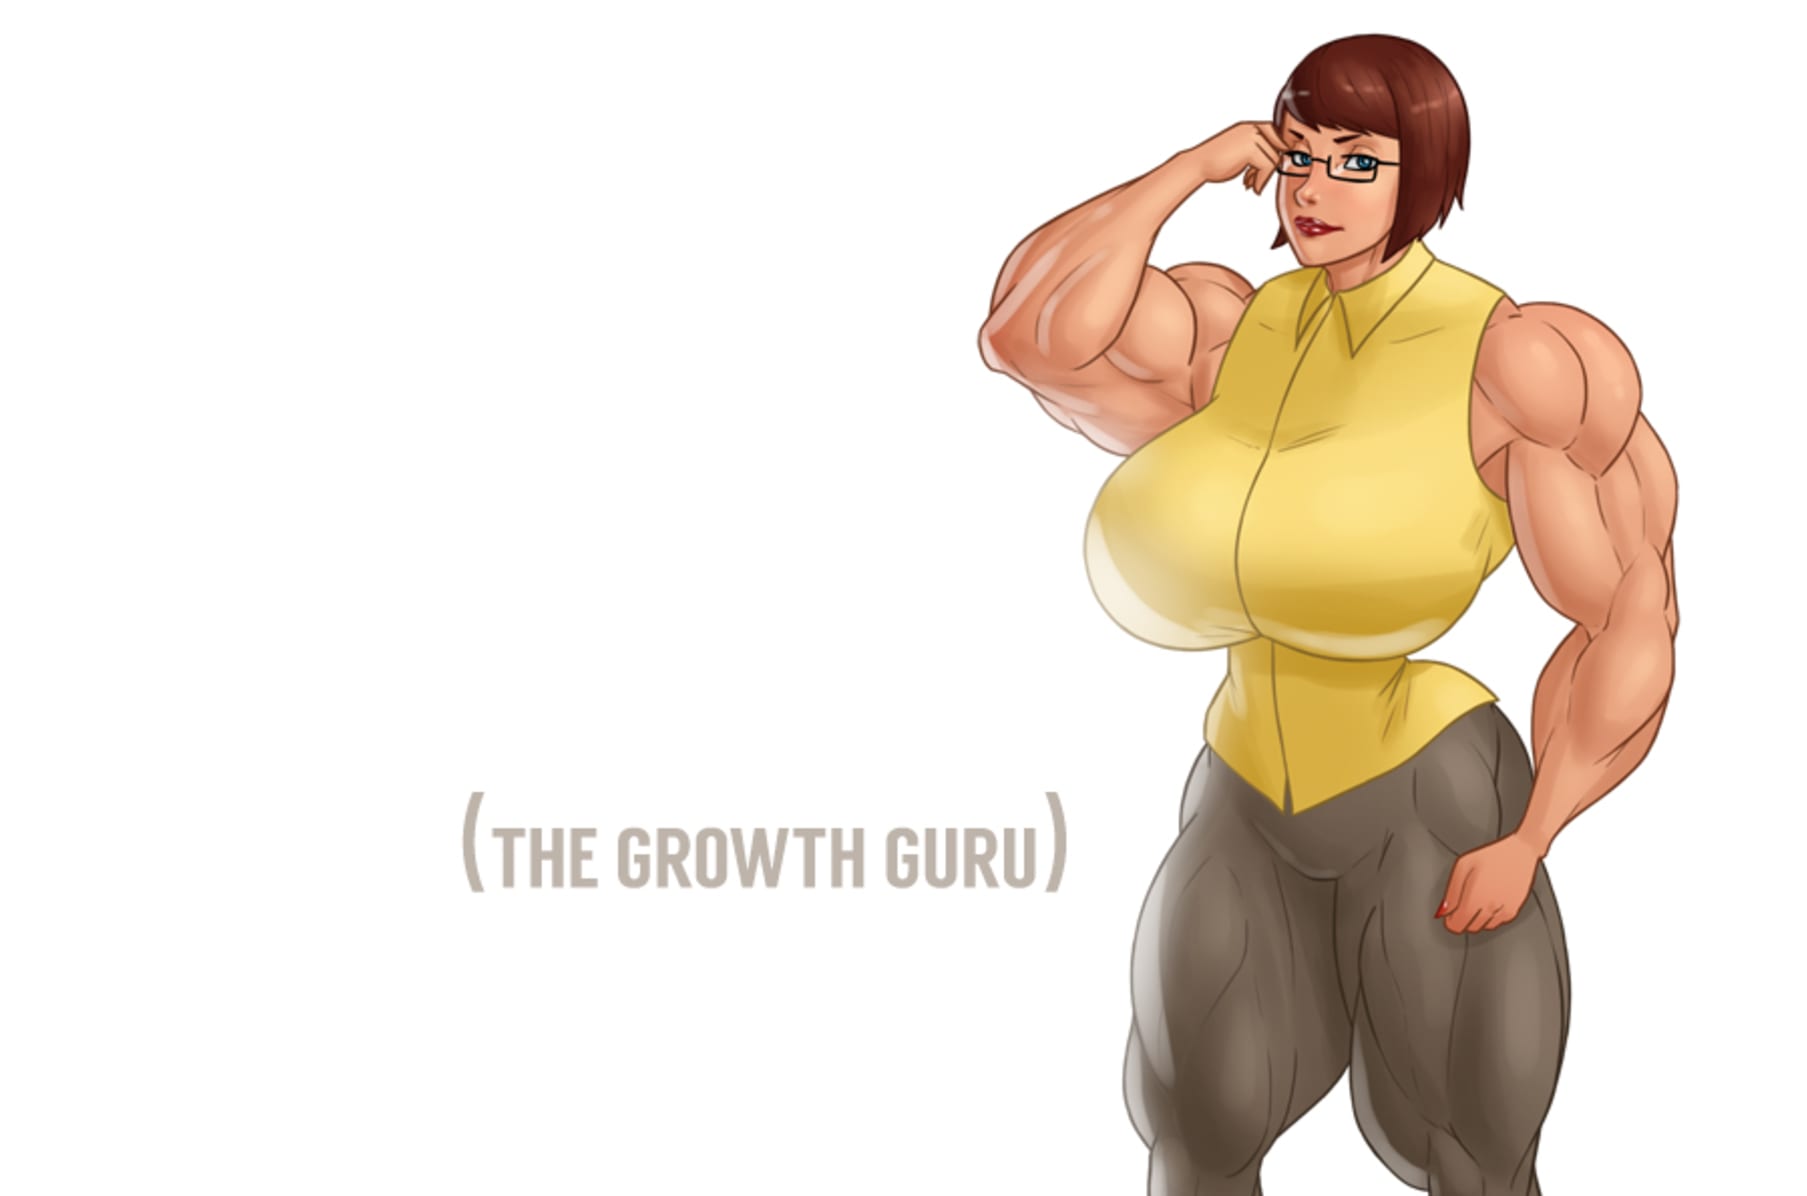 Female muscle growth game